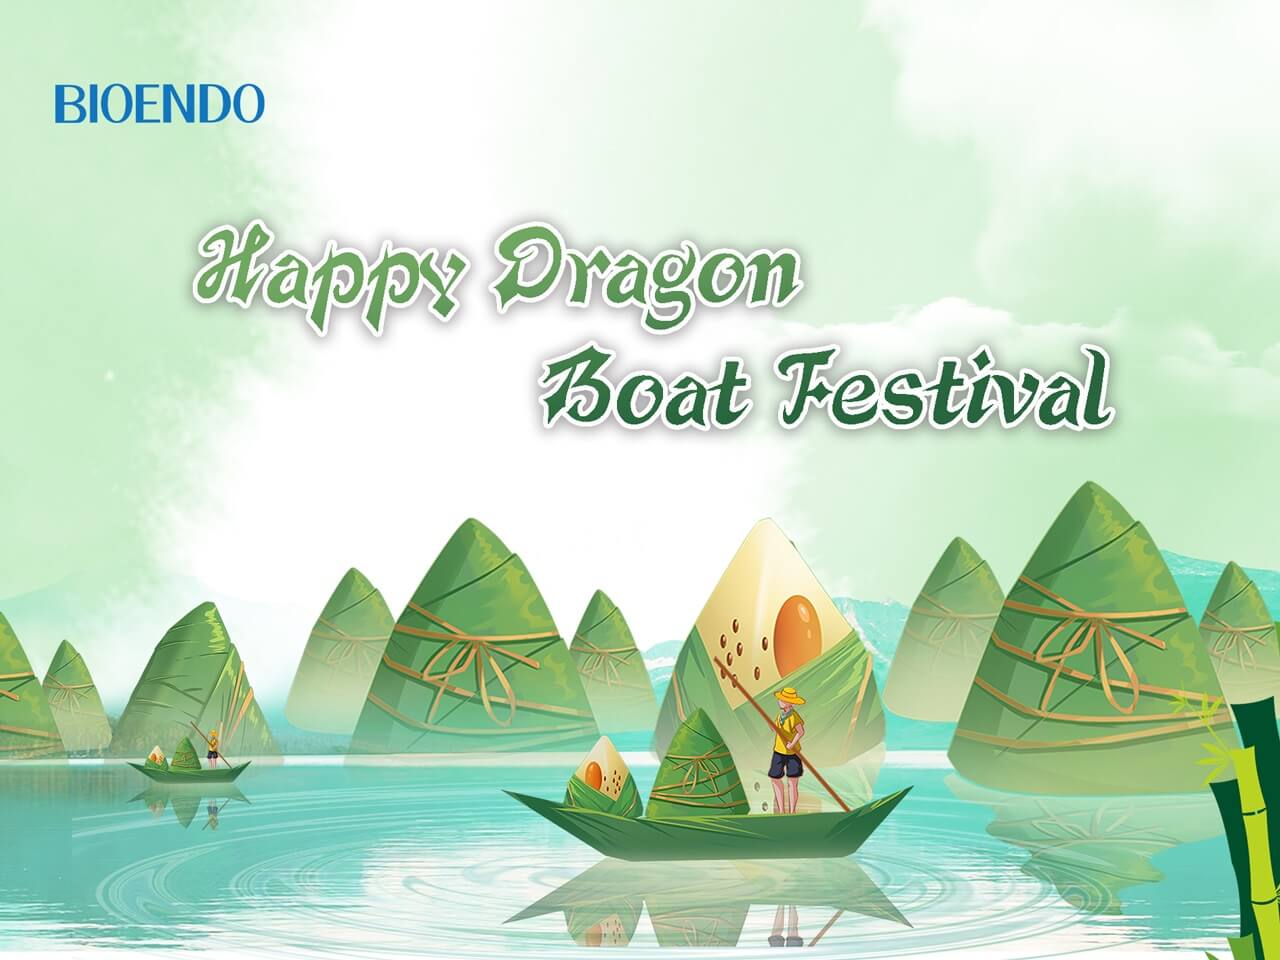 How to Protect Yourself during the Dragon Boat Festival